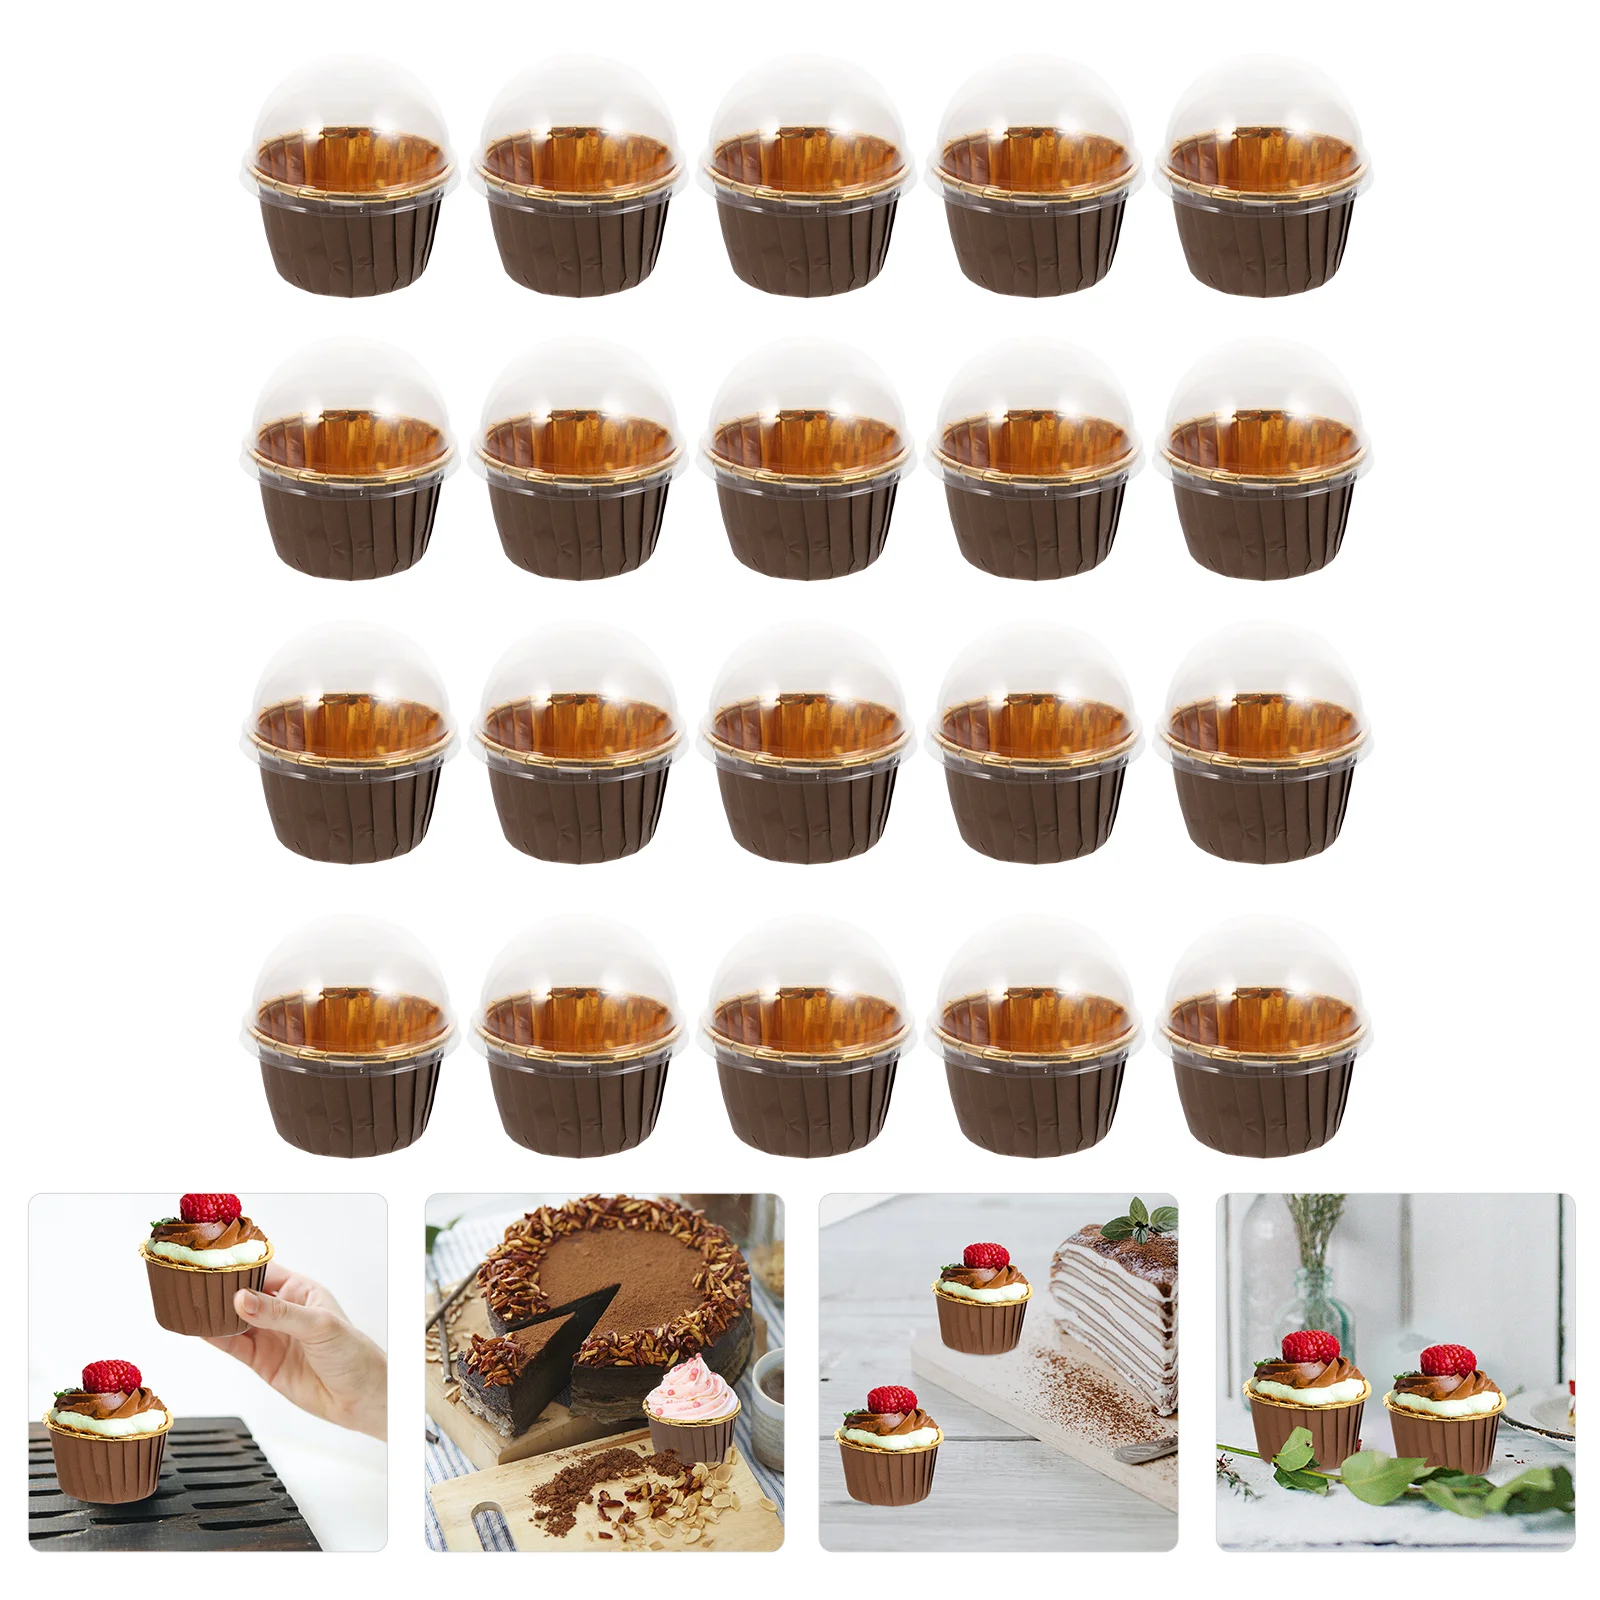 

Cupcake Cups Baking Muffin Liners Paper Cake Mini Wrapper Cup Wrappers Cases Dessert Crimping Molds Lid Dome Holder Tulip